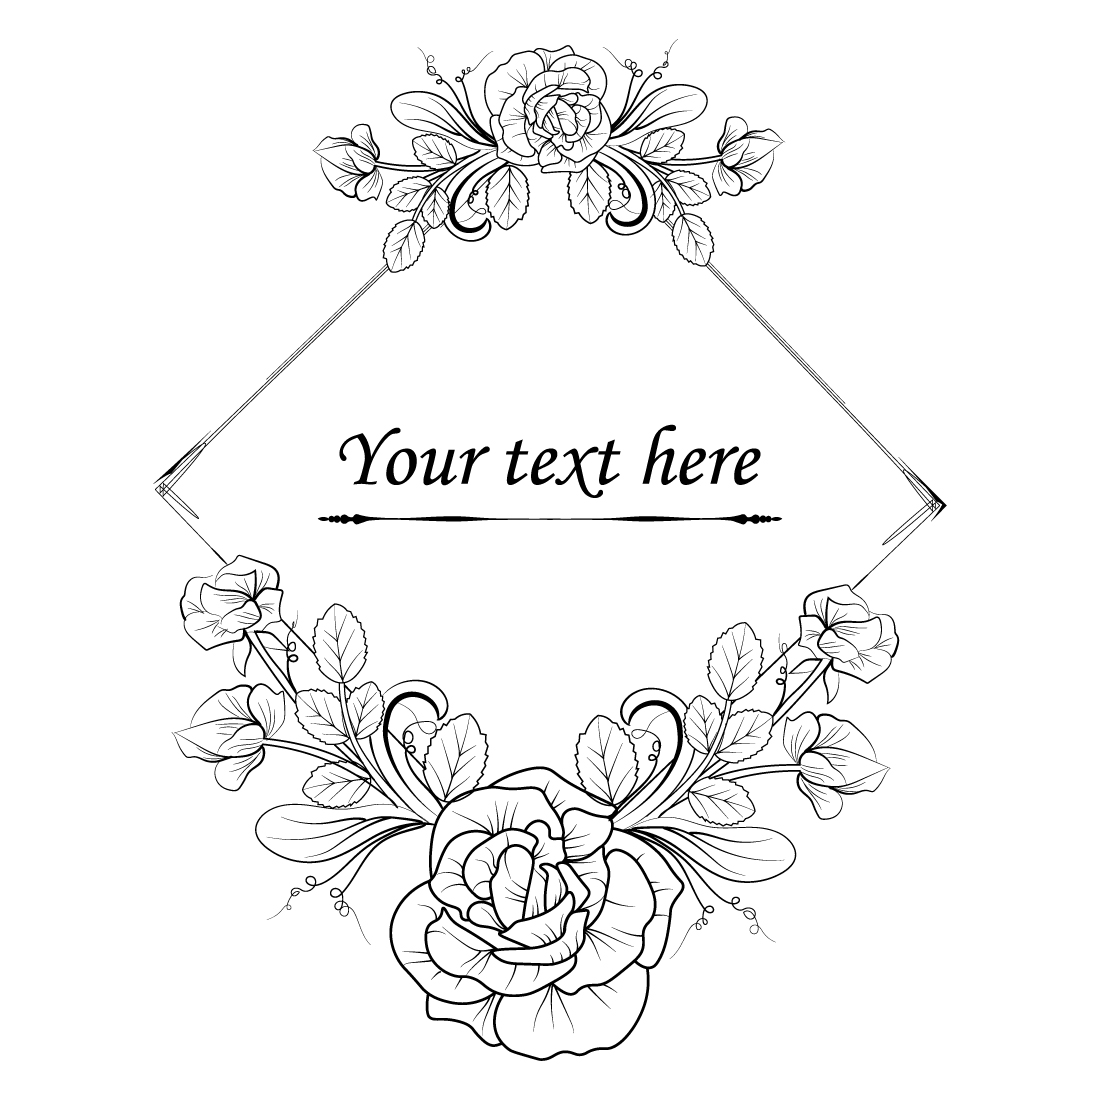 rose vector, rose vector black and white, vector rose flower clipart black and white, cover image.